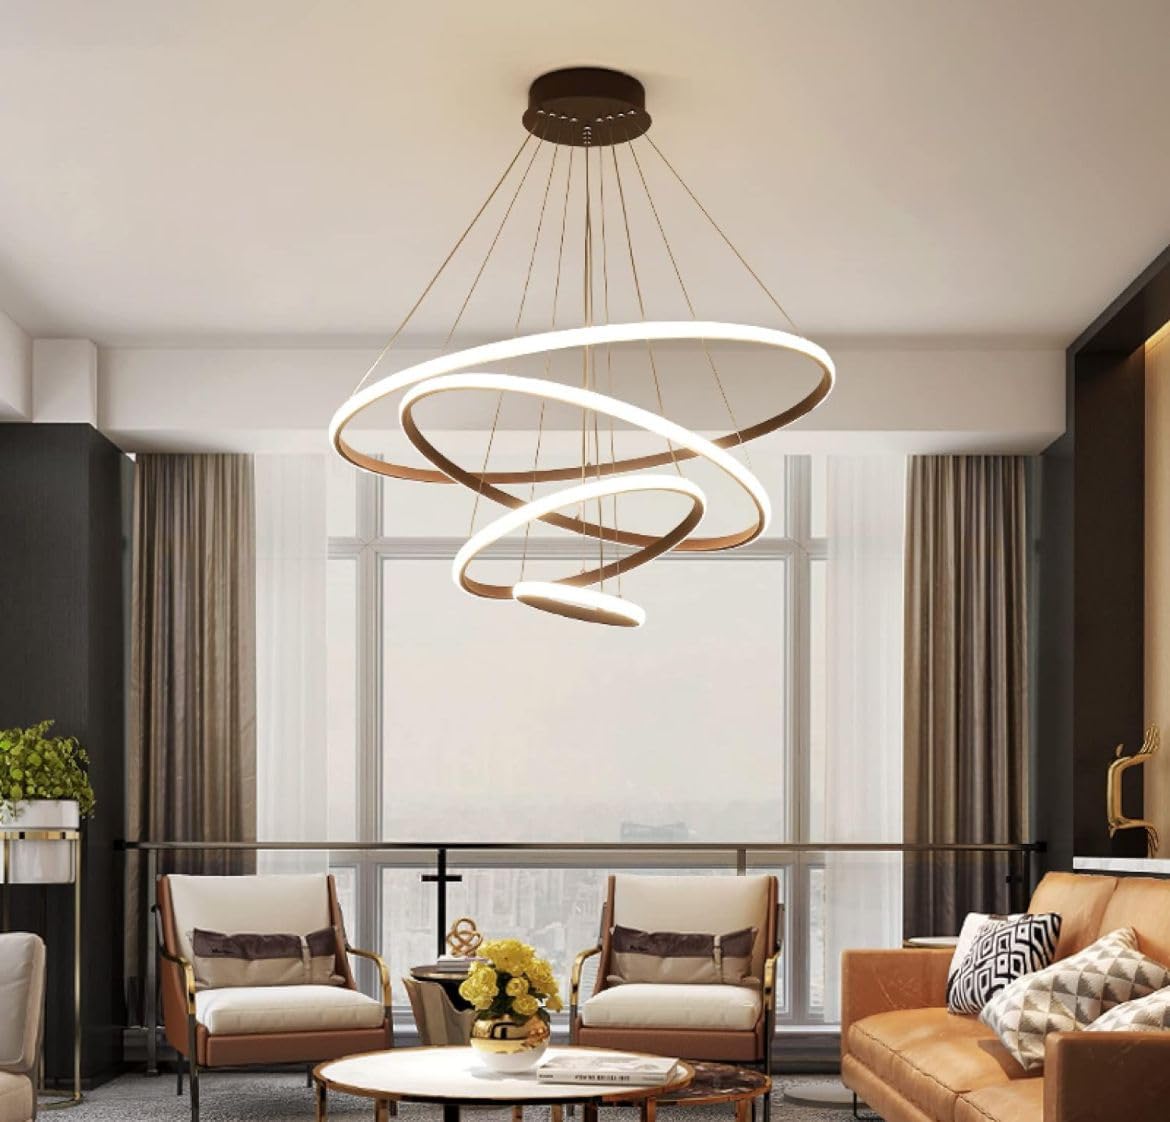 Illuminate Your Space in Elegance: The Timeless Charm of Chandeliers